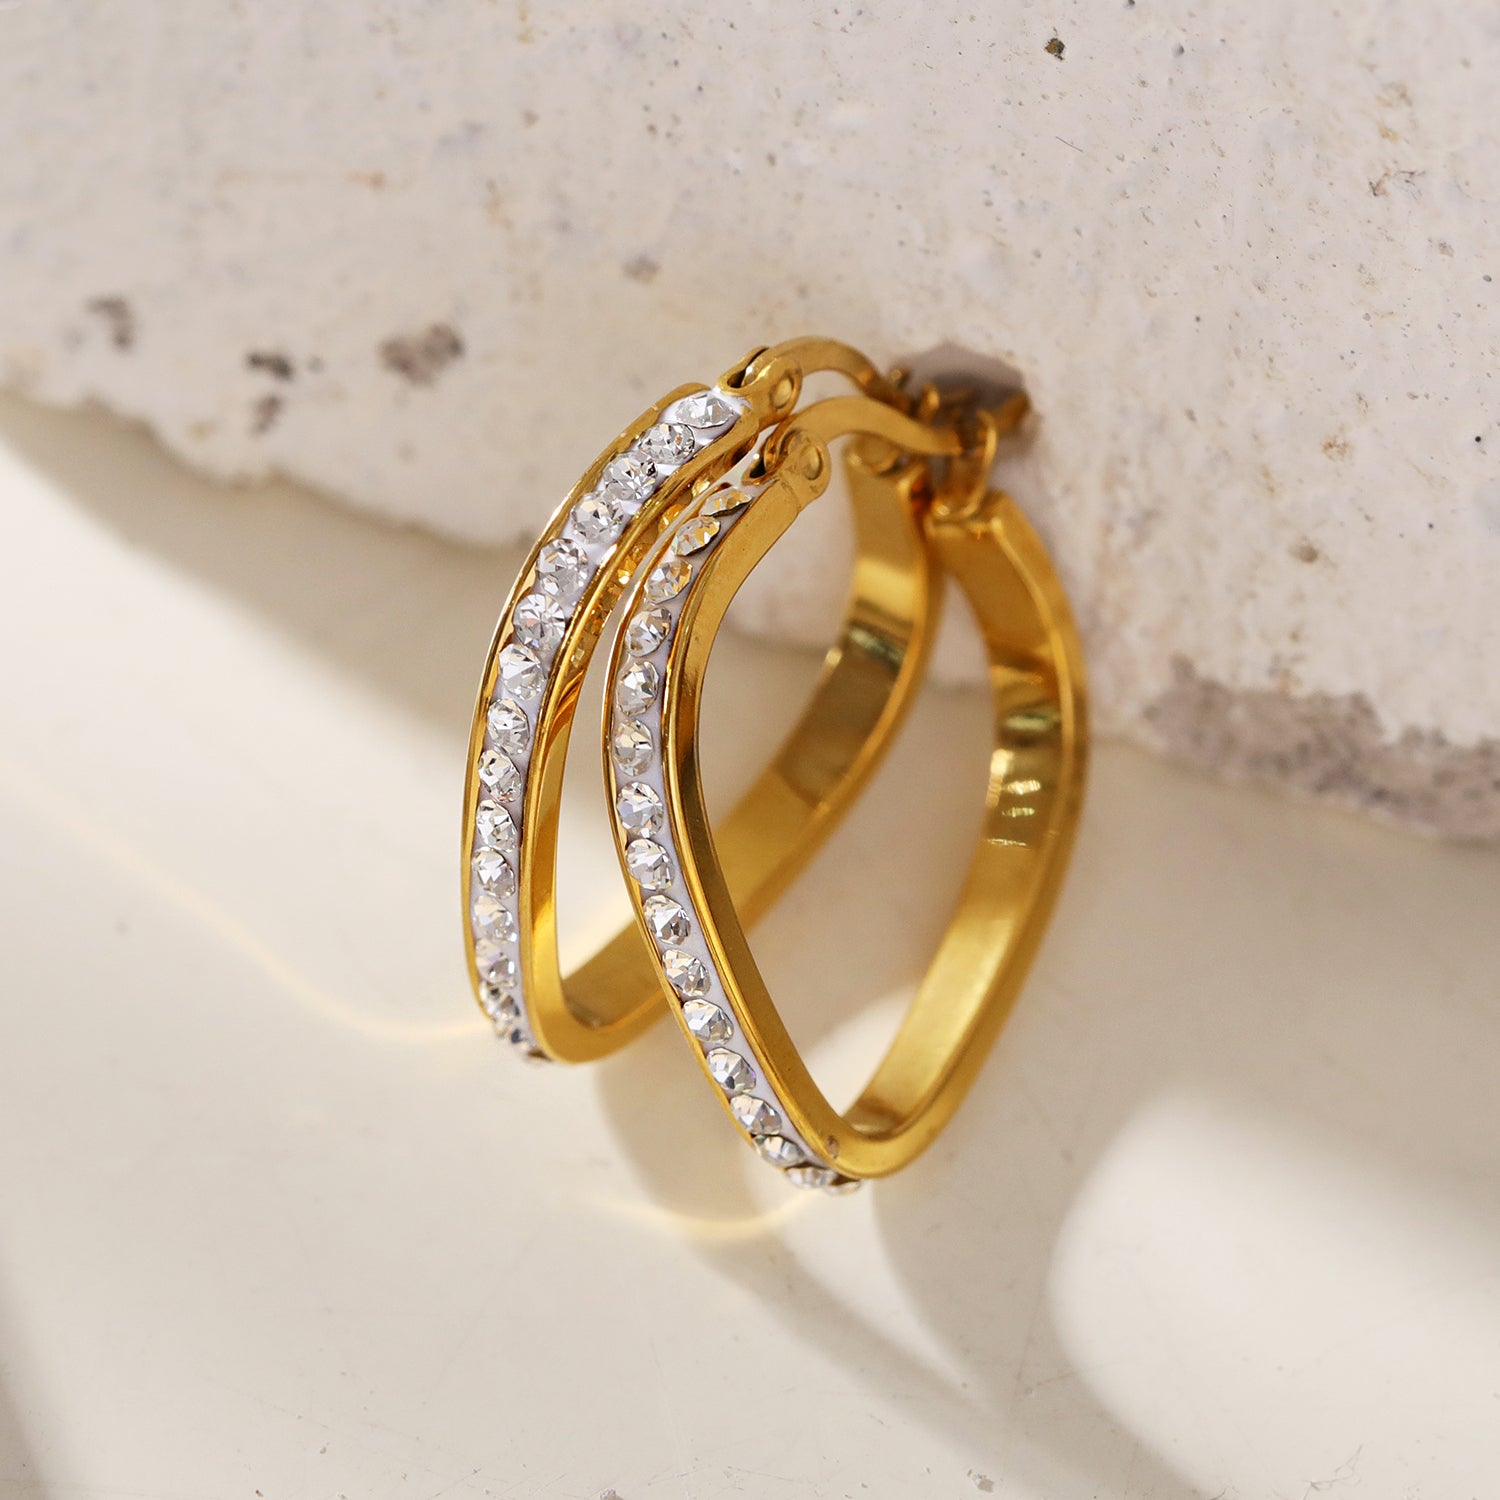 Style MELFI 08565: Rounded Triangle Shaped Hoops embedded with Zirconia Gemstones.